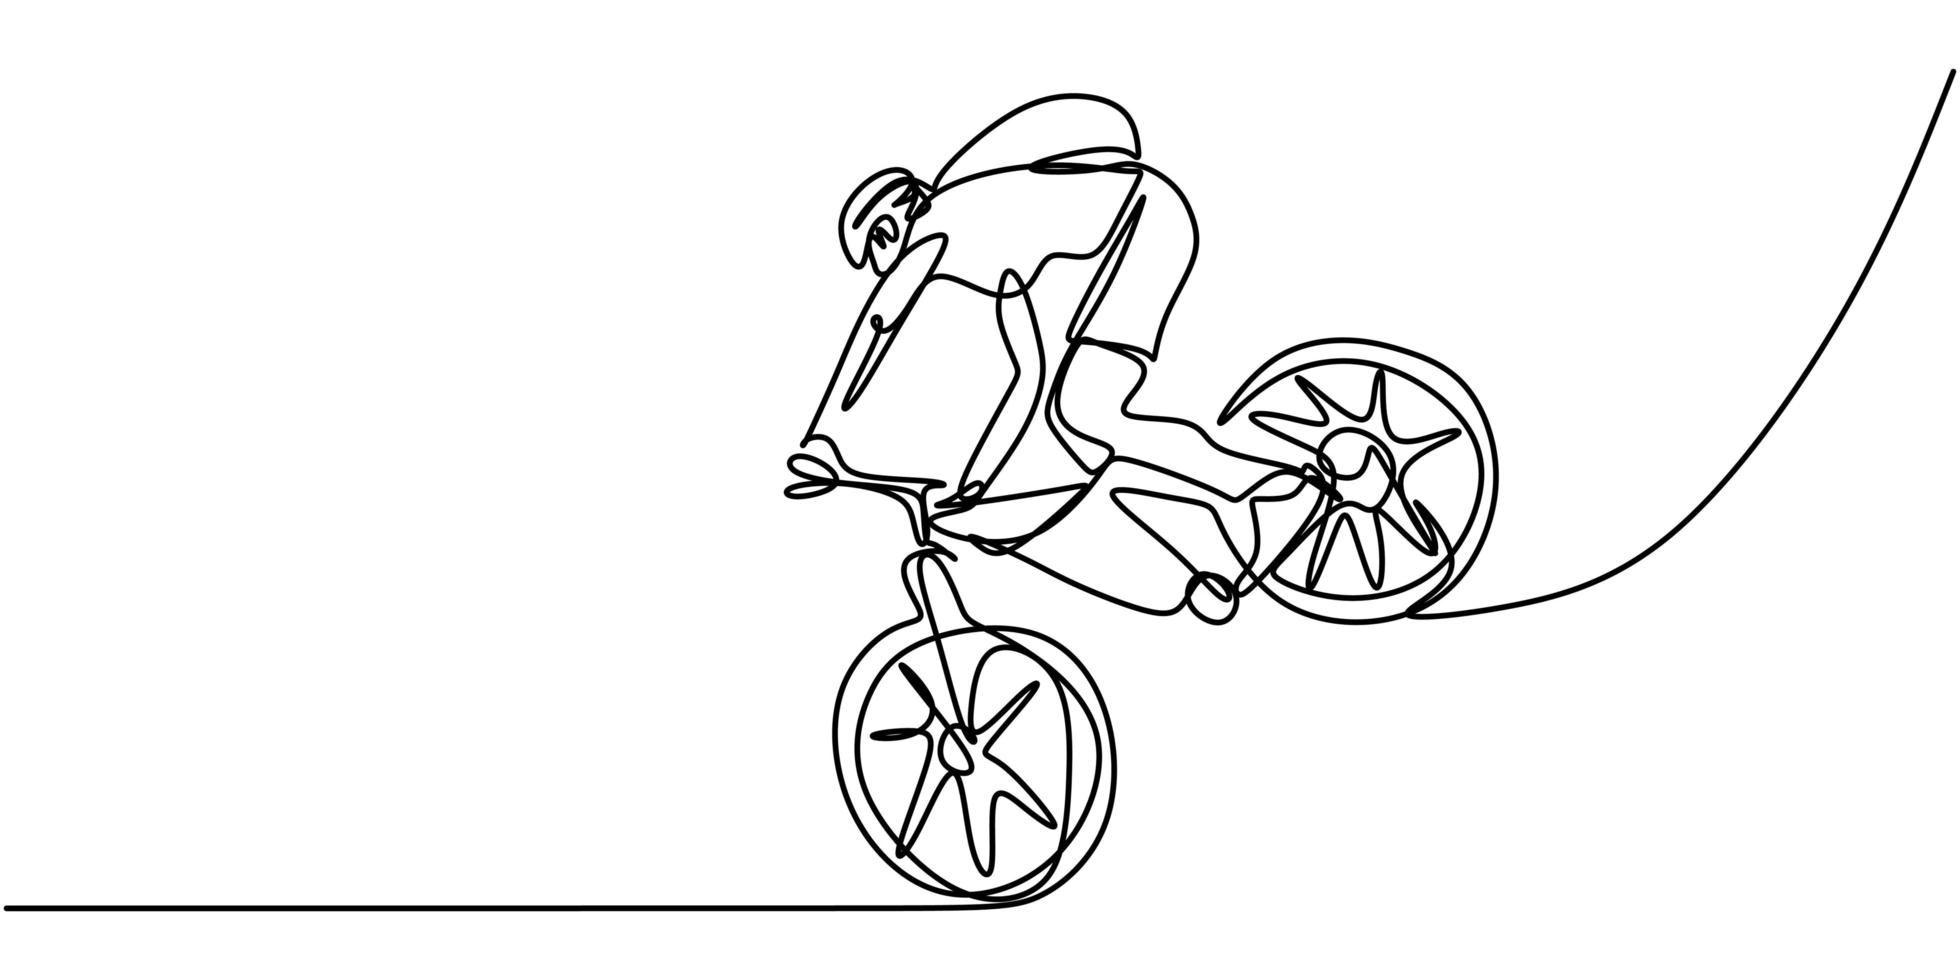 Continuous one line young cyclist man in a helmet performs a trick on bicycle. vector